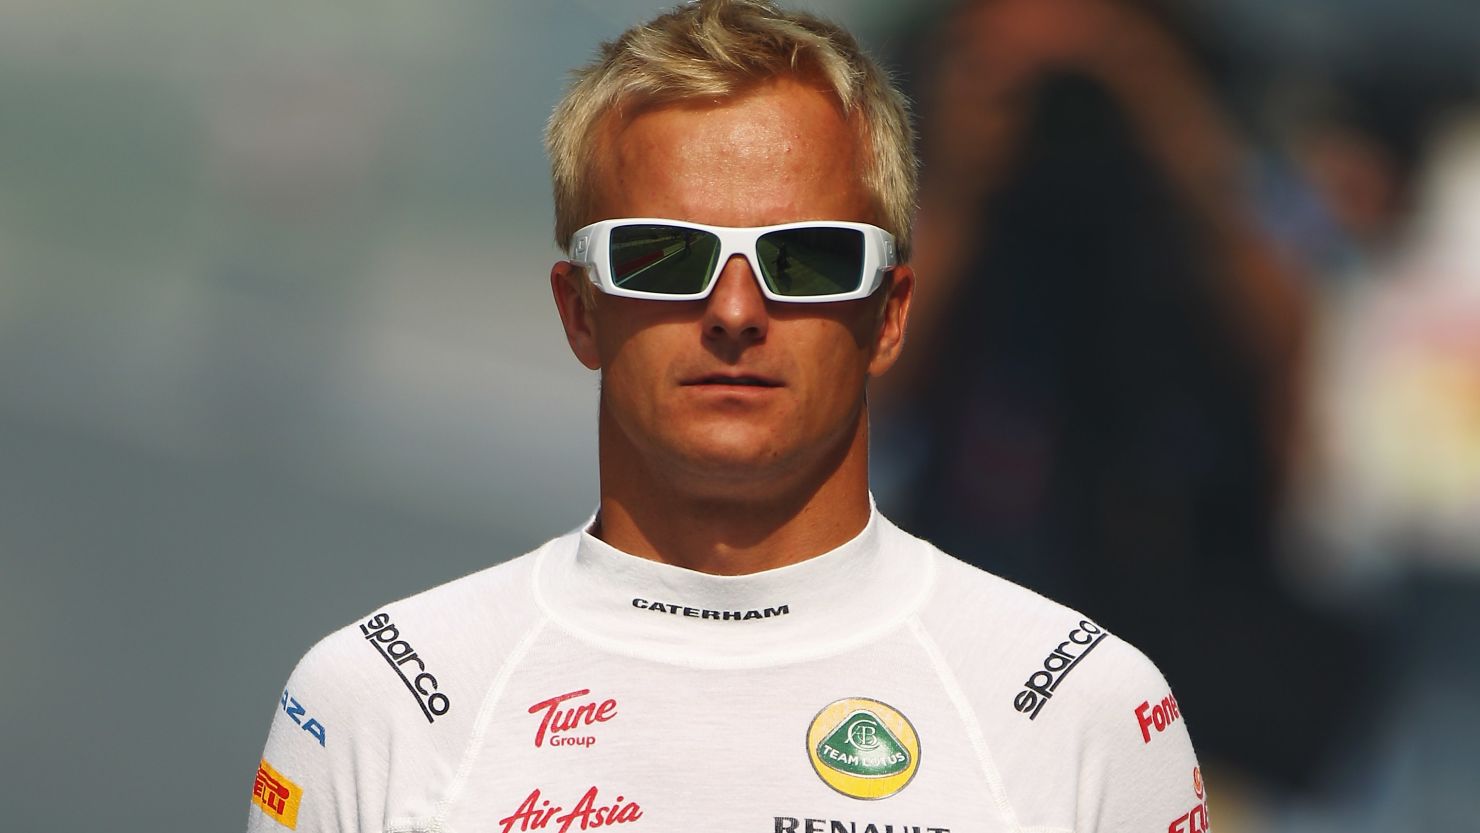 Finnish driver Heikki Kovalainen has spent three of his six years in F1 with the Caterham team.